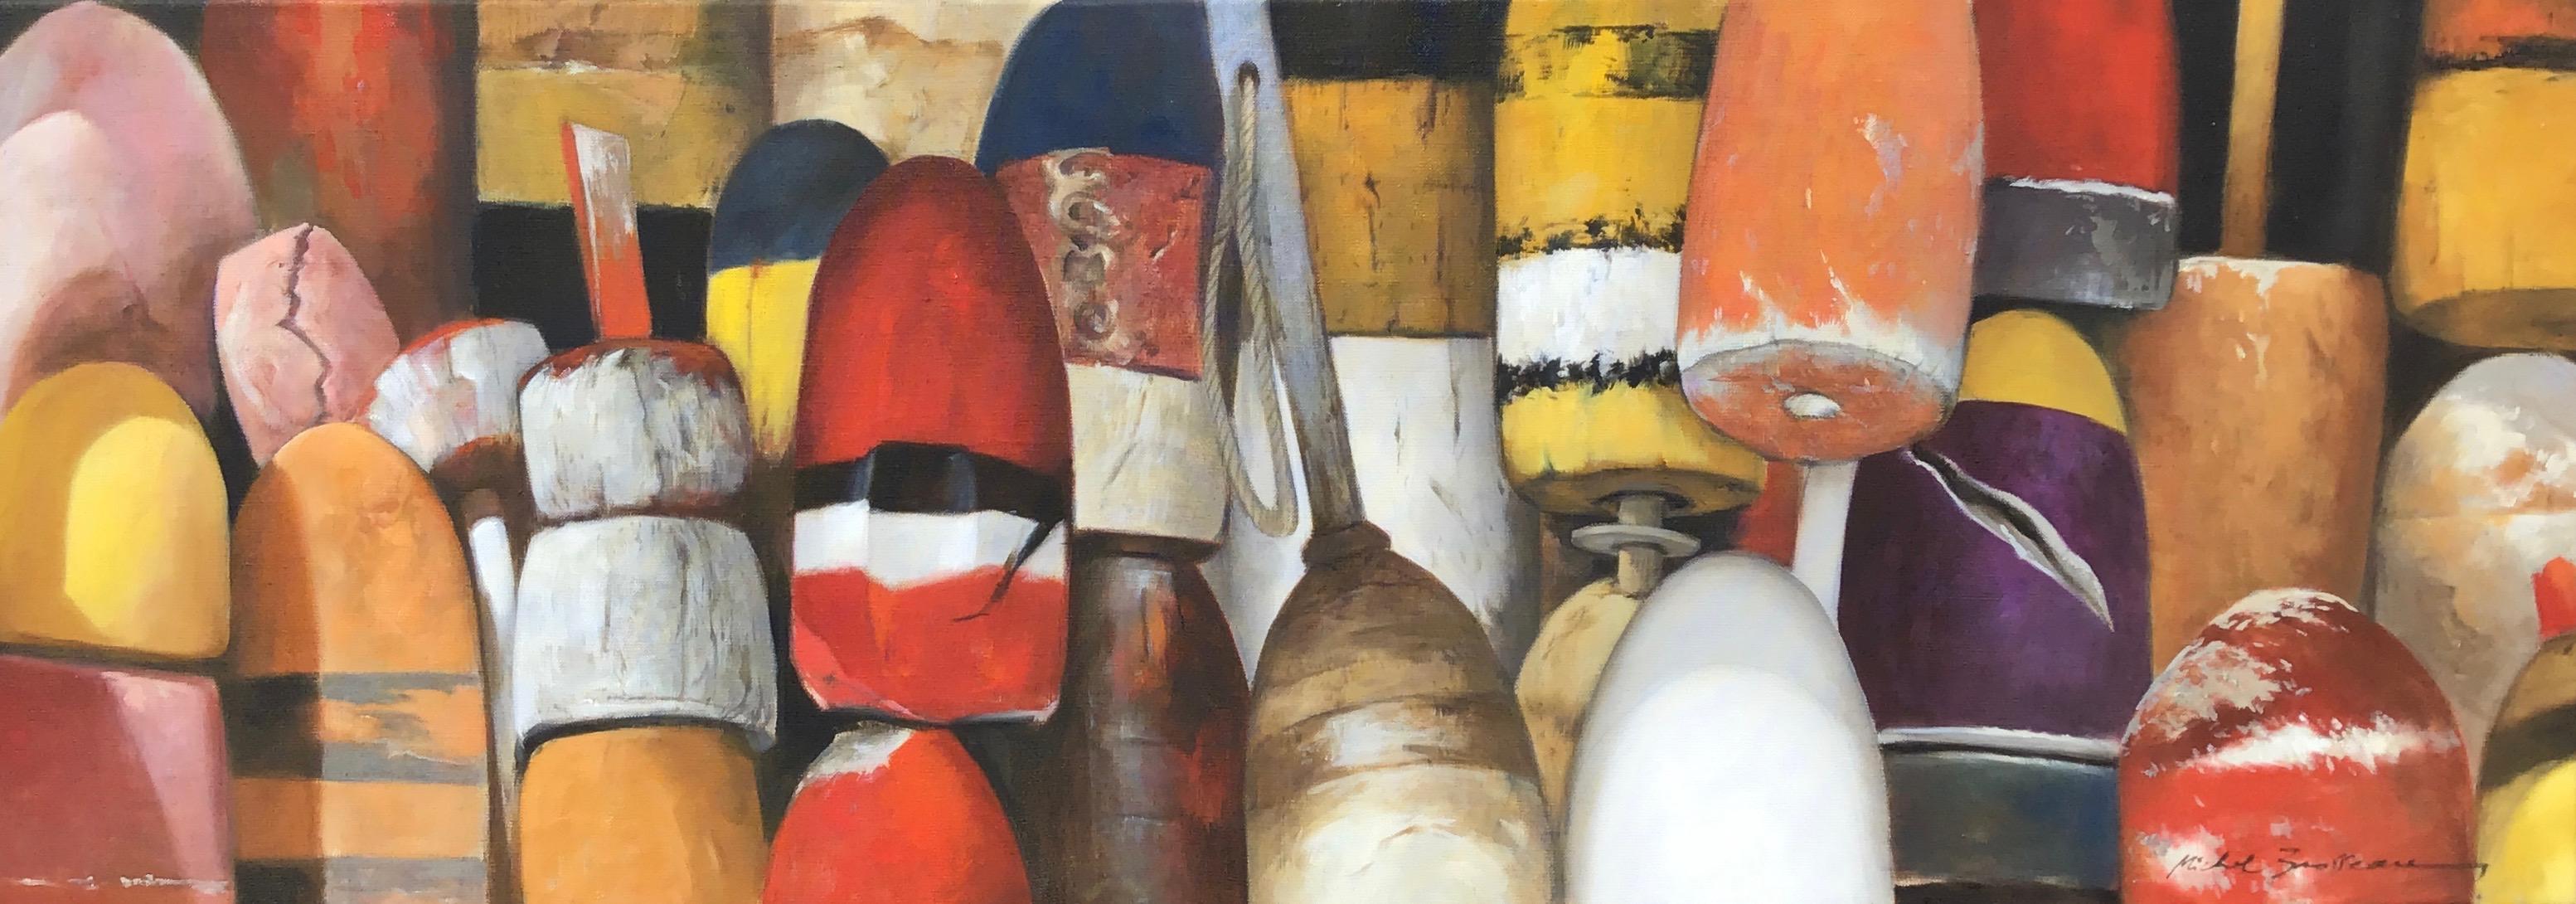 Michel Brosseau Still-Life Painting - "Buoys on October" oil painting of red, orange and yellow buoys